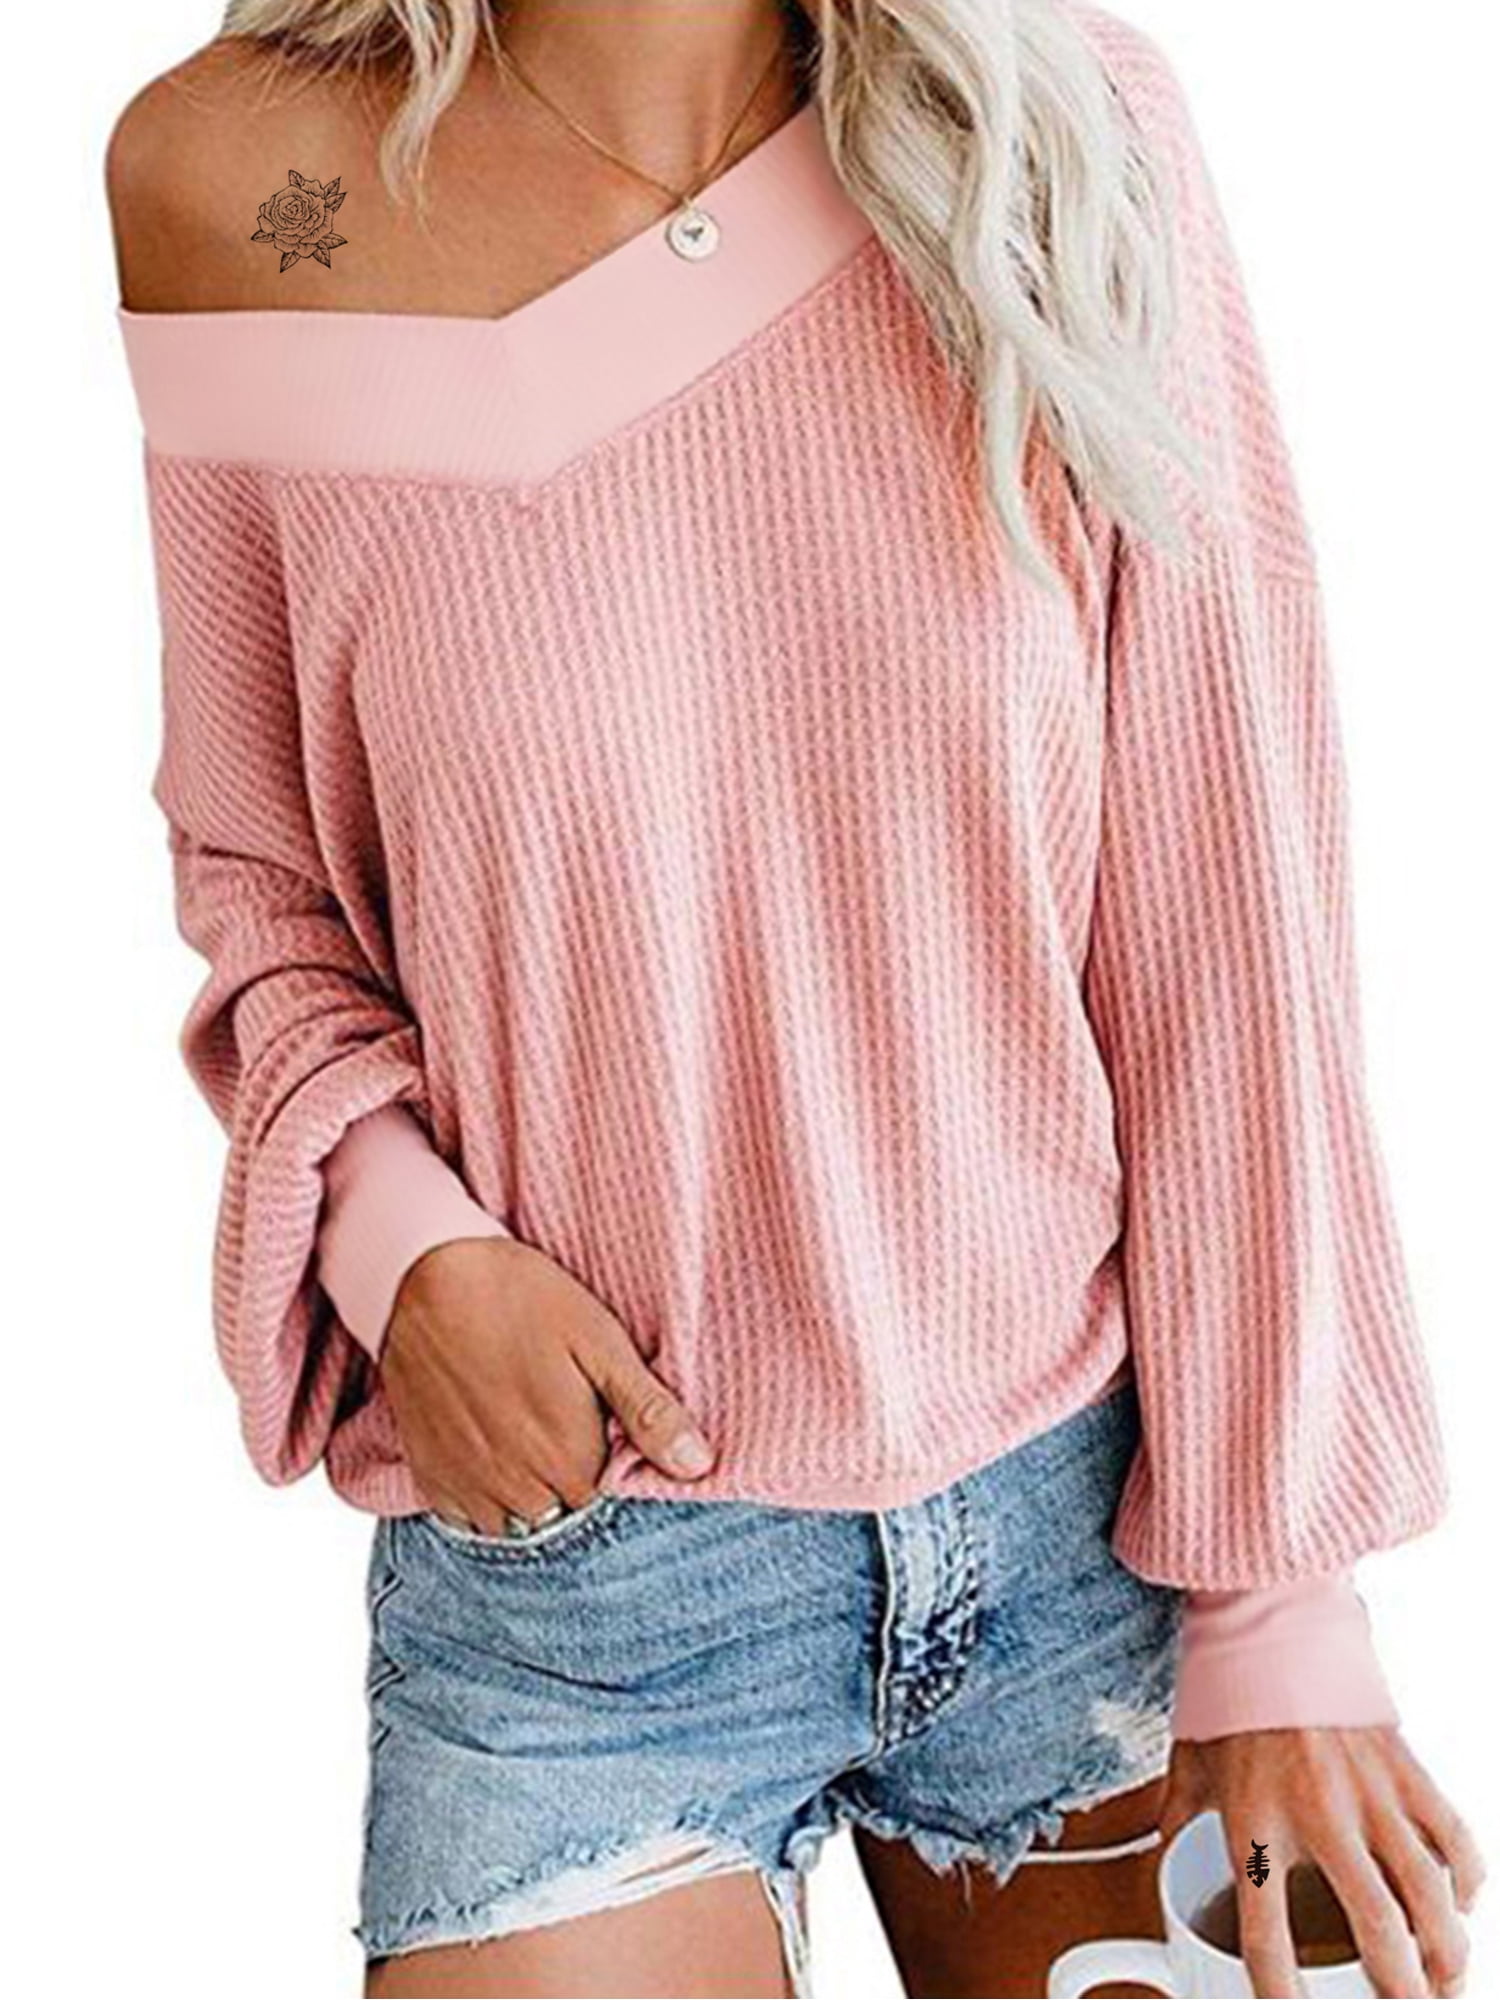 Ladies Womens Waffle Knitted Sweater Long Sleeve Warm Oversized Baggy Jumper Top 